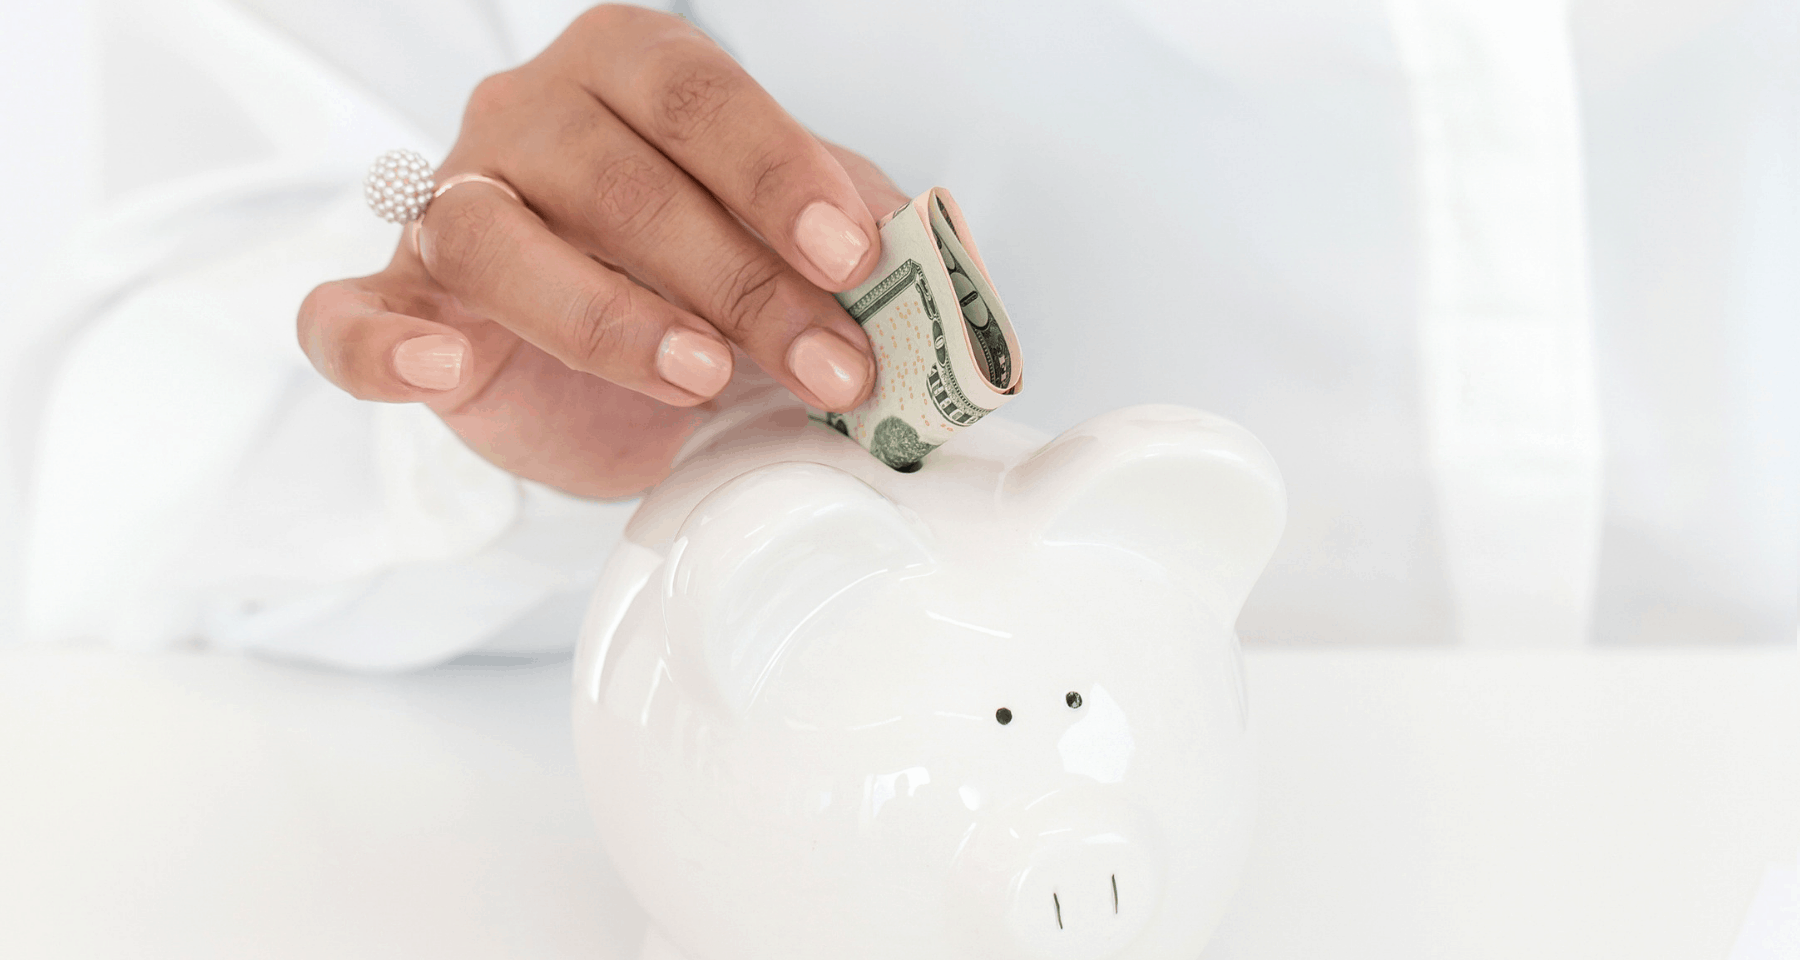 Money Saving Tips – Stop Buying These 8 Things To Save $19,642